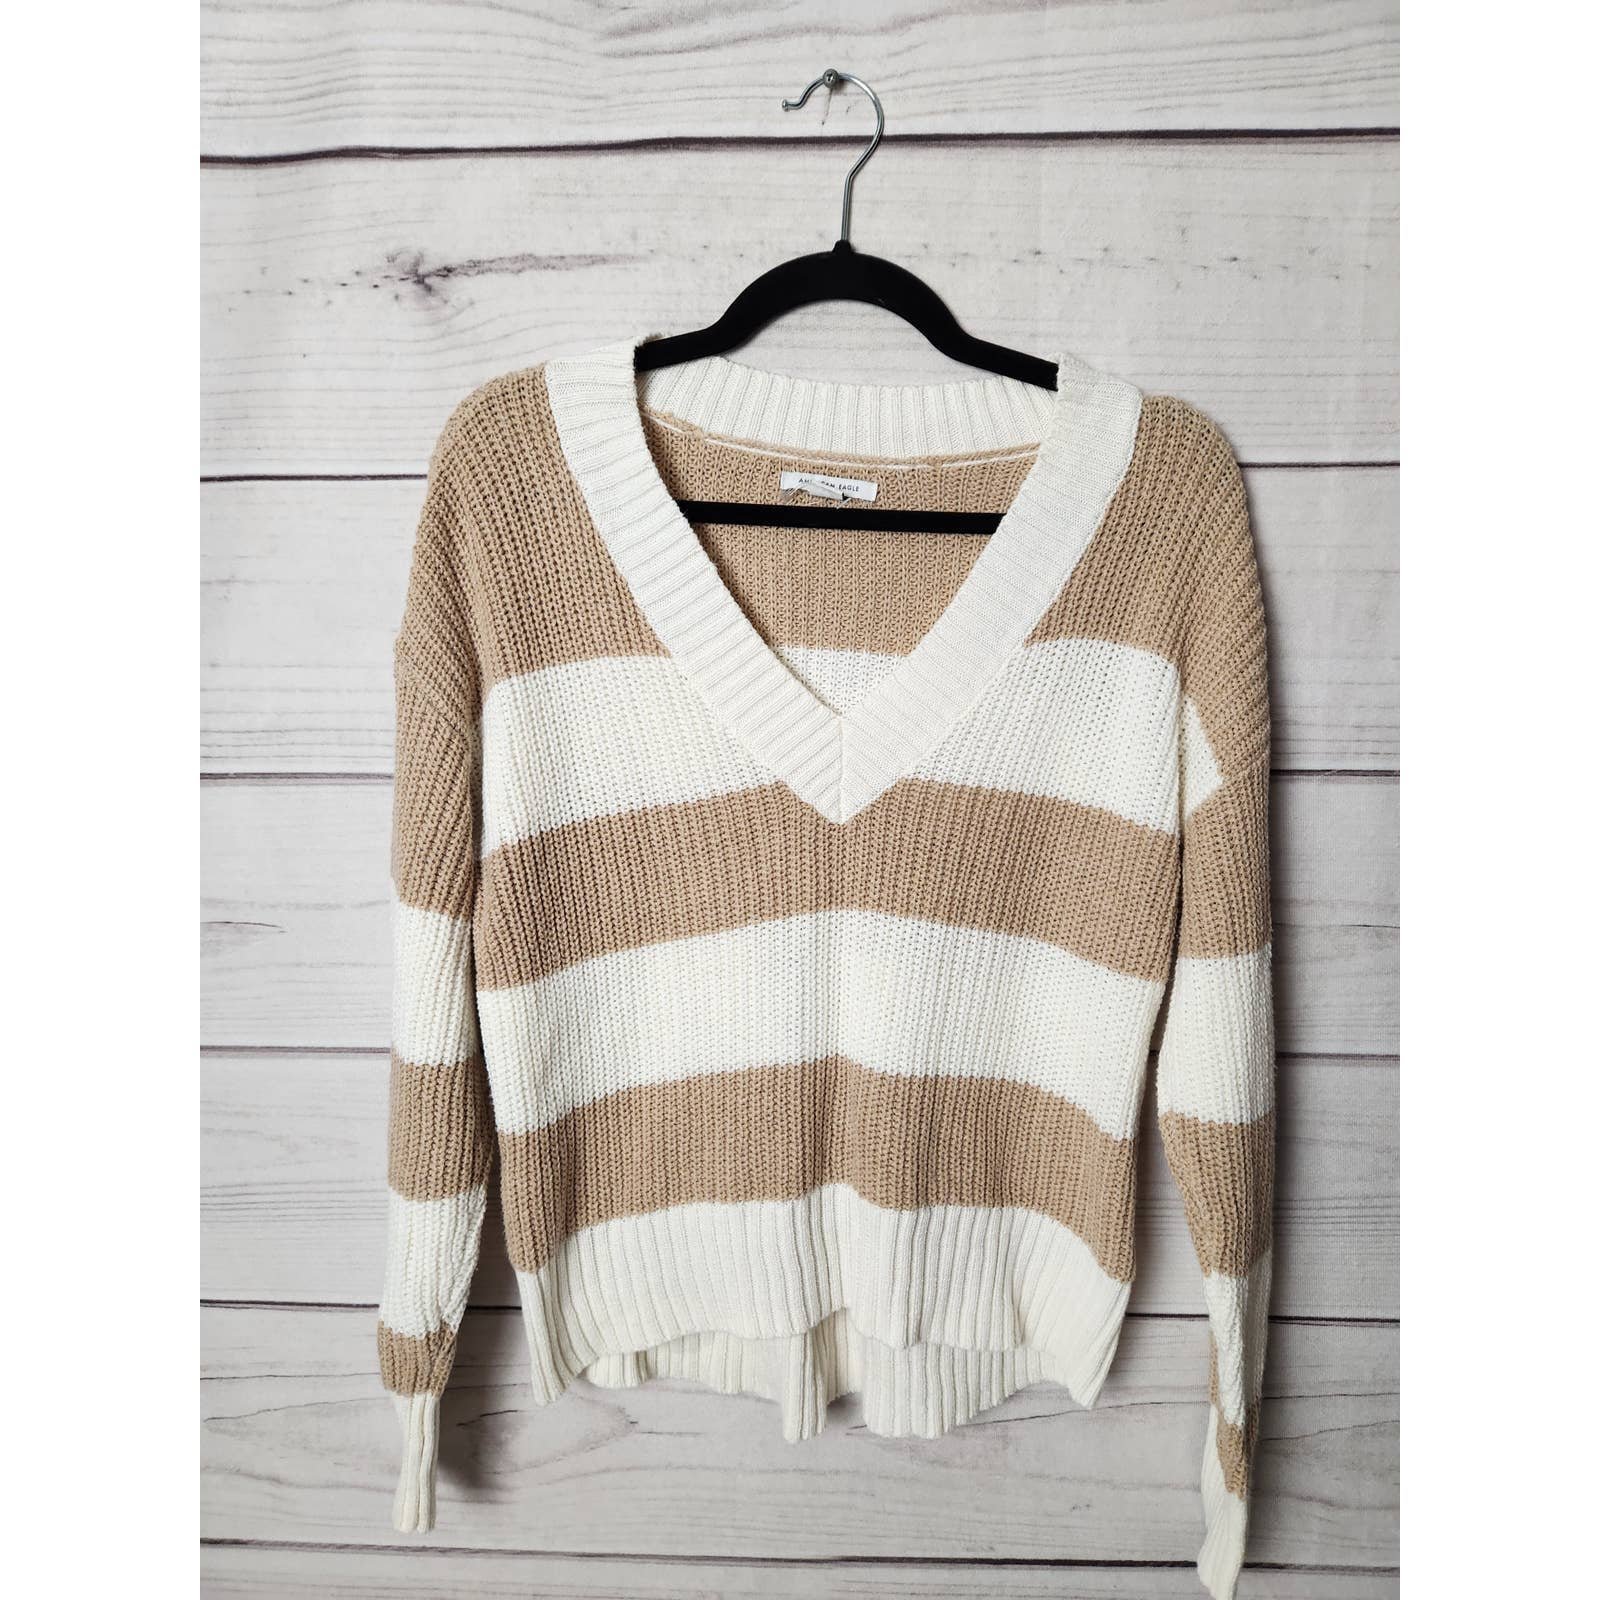 good price American Eagle Womens Sweater Knitted V Neck Striped Brown White Size XXS kbaU6xozI just for you